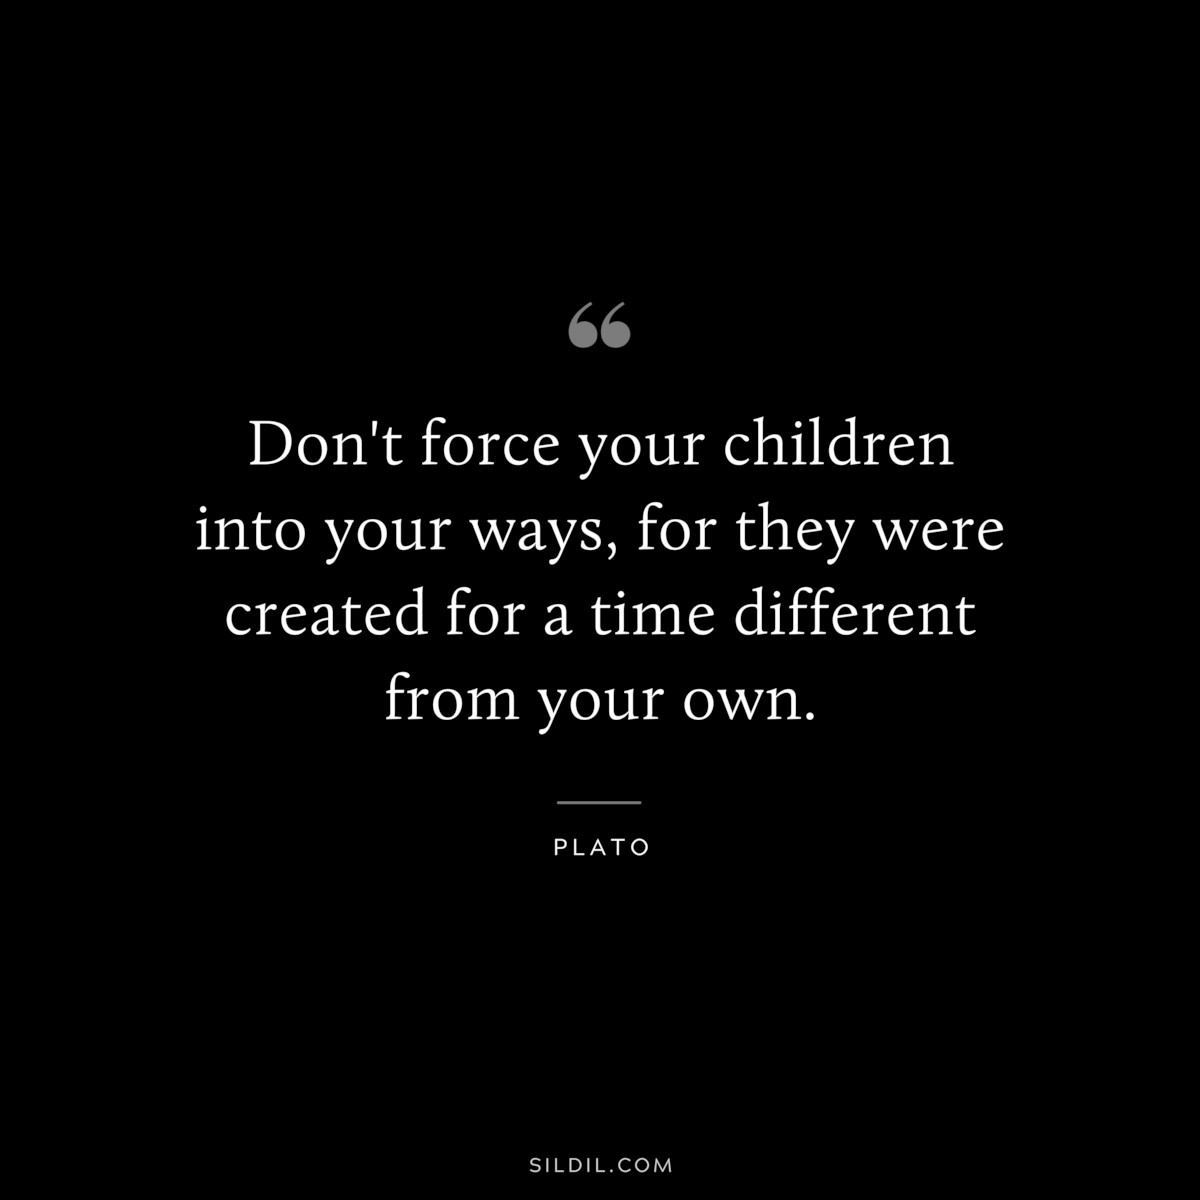 Don't force your children into your ways, for they were created for a time different from your own. ― Plato